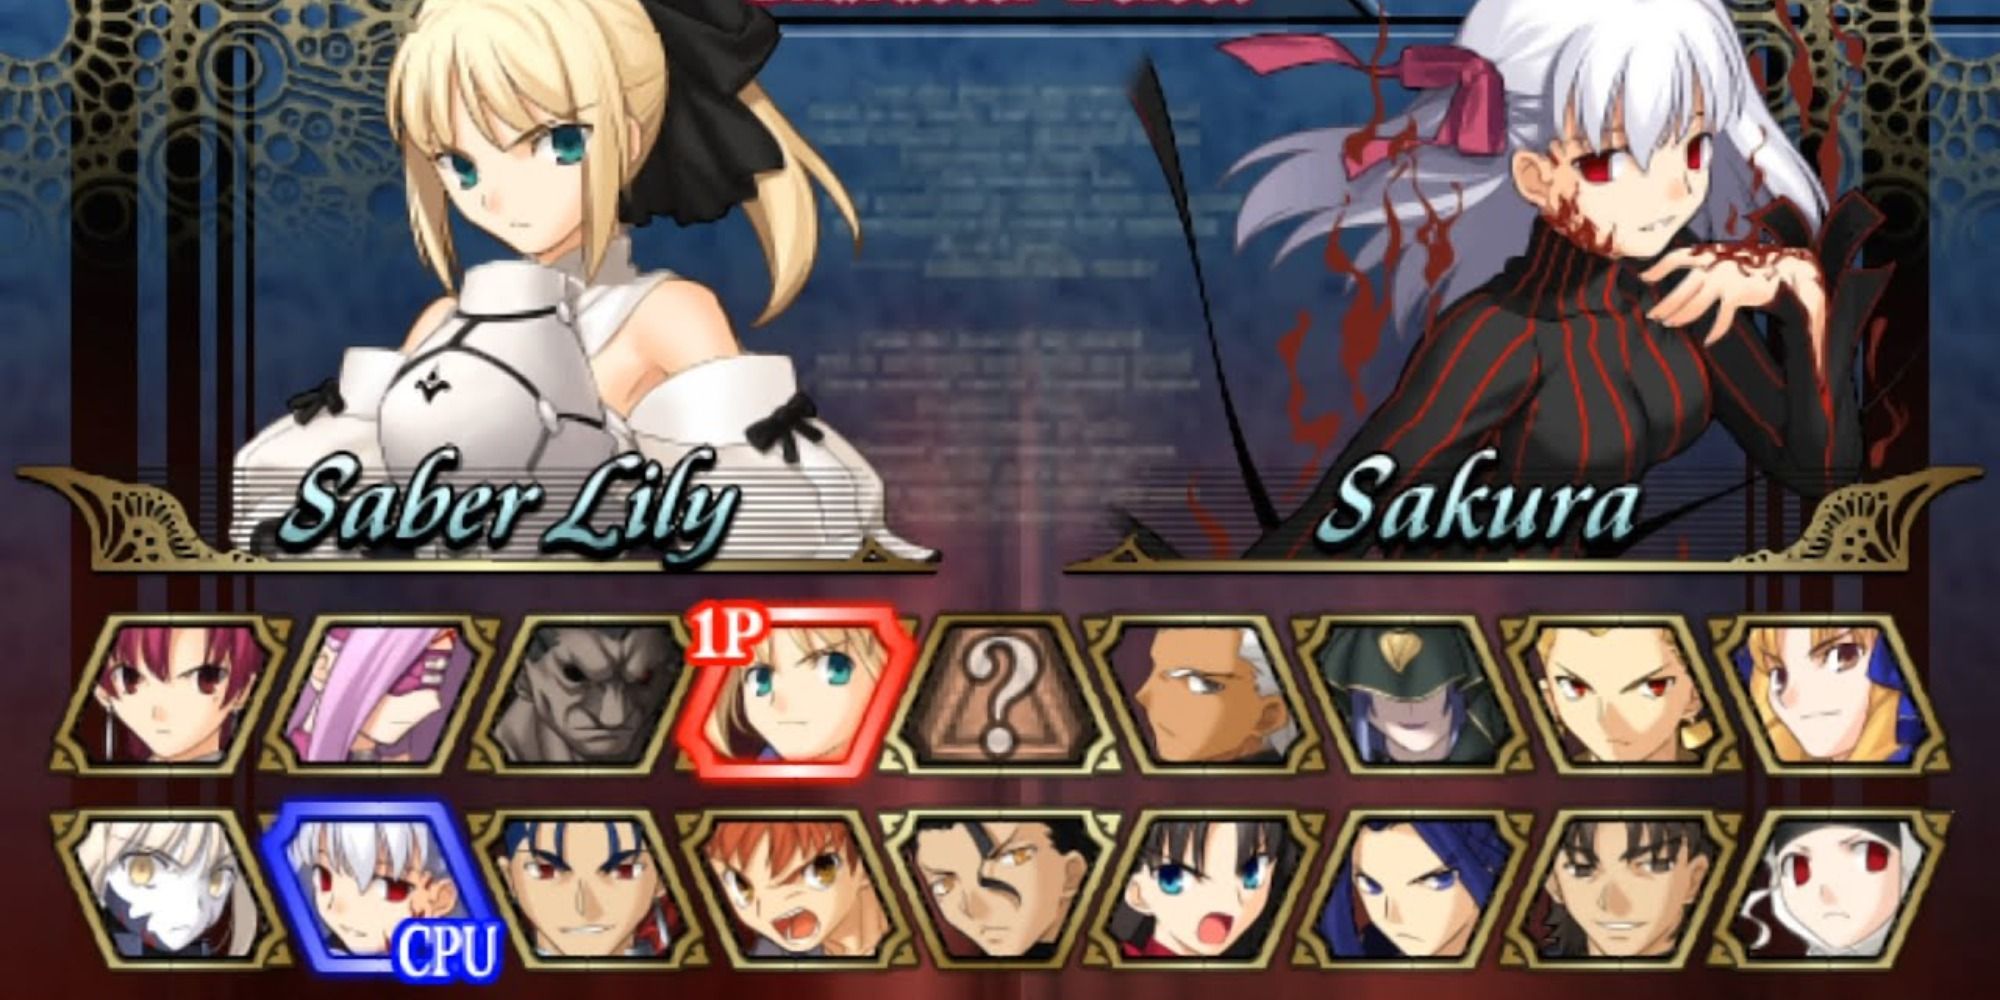 Saber Lily and Sakura on the character selection screen